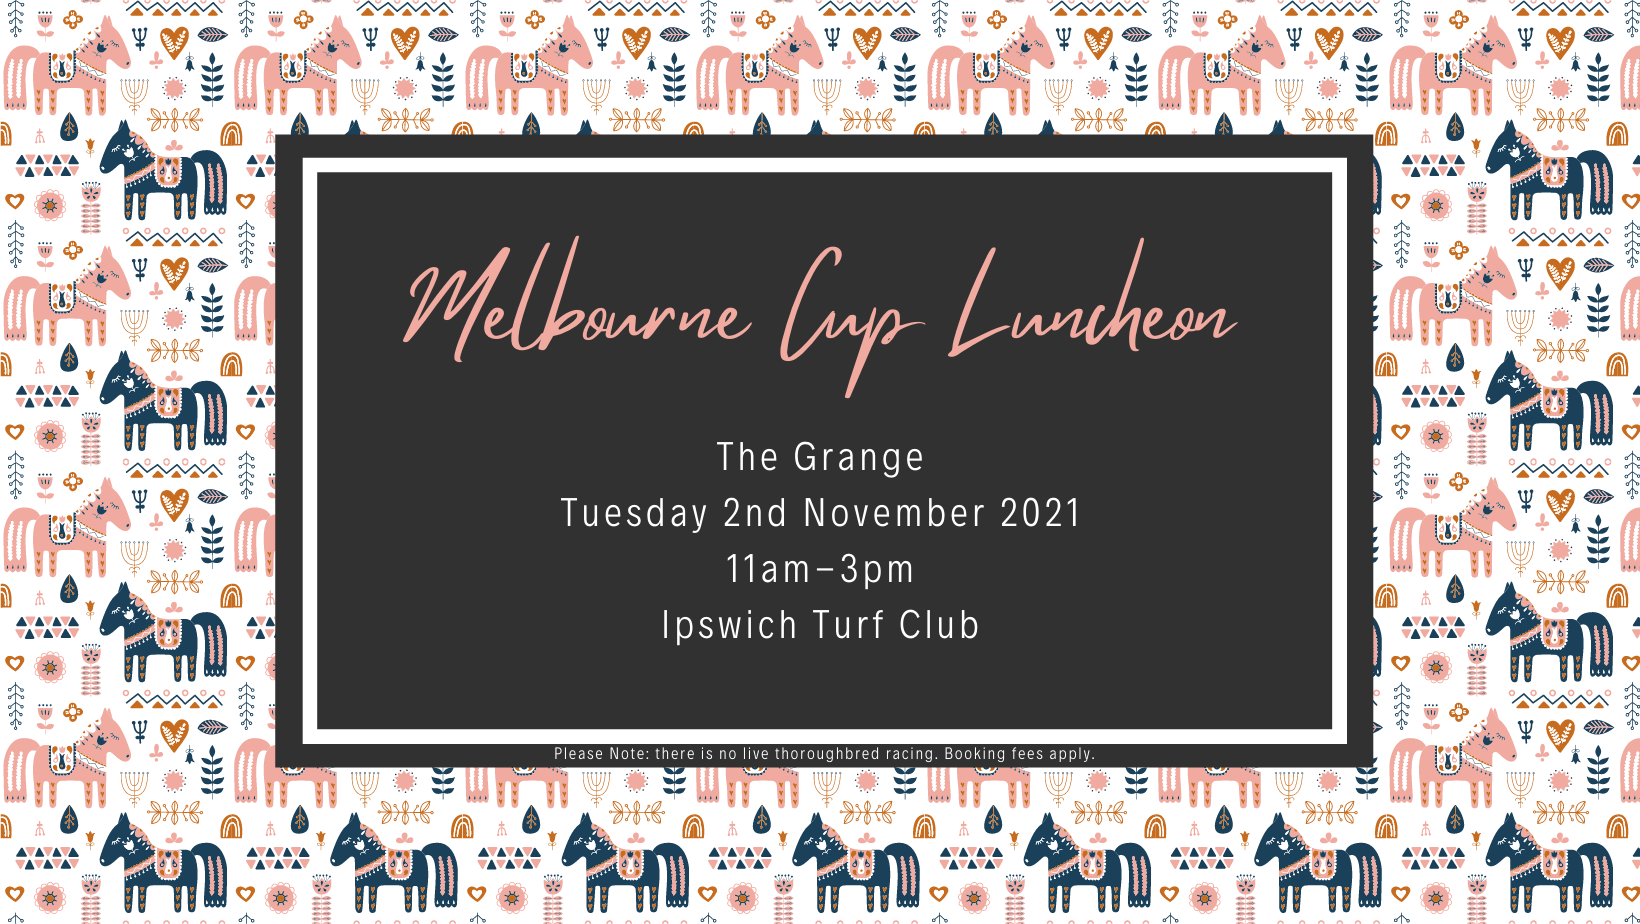 Grange Lounge Melbourne Cup Luncheon